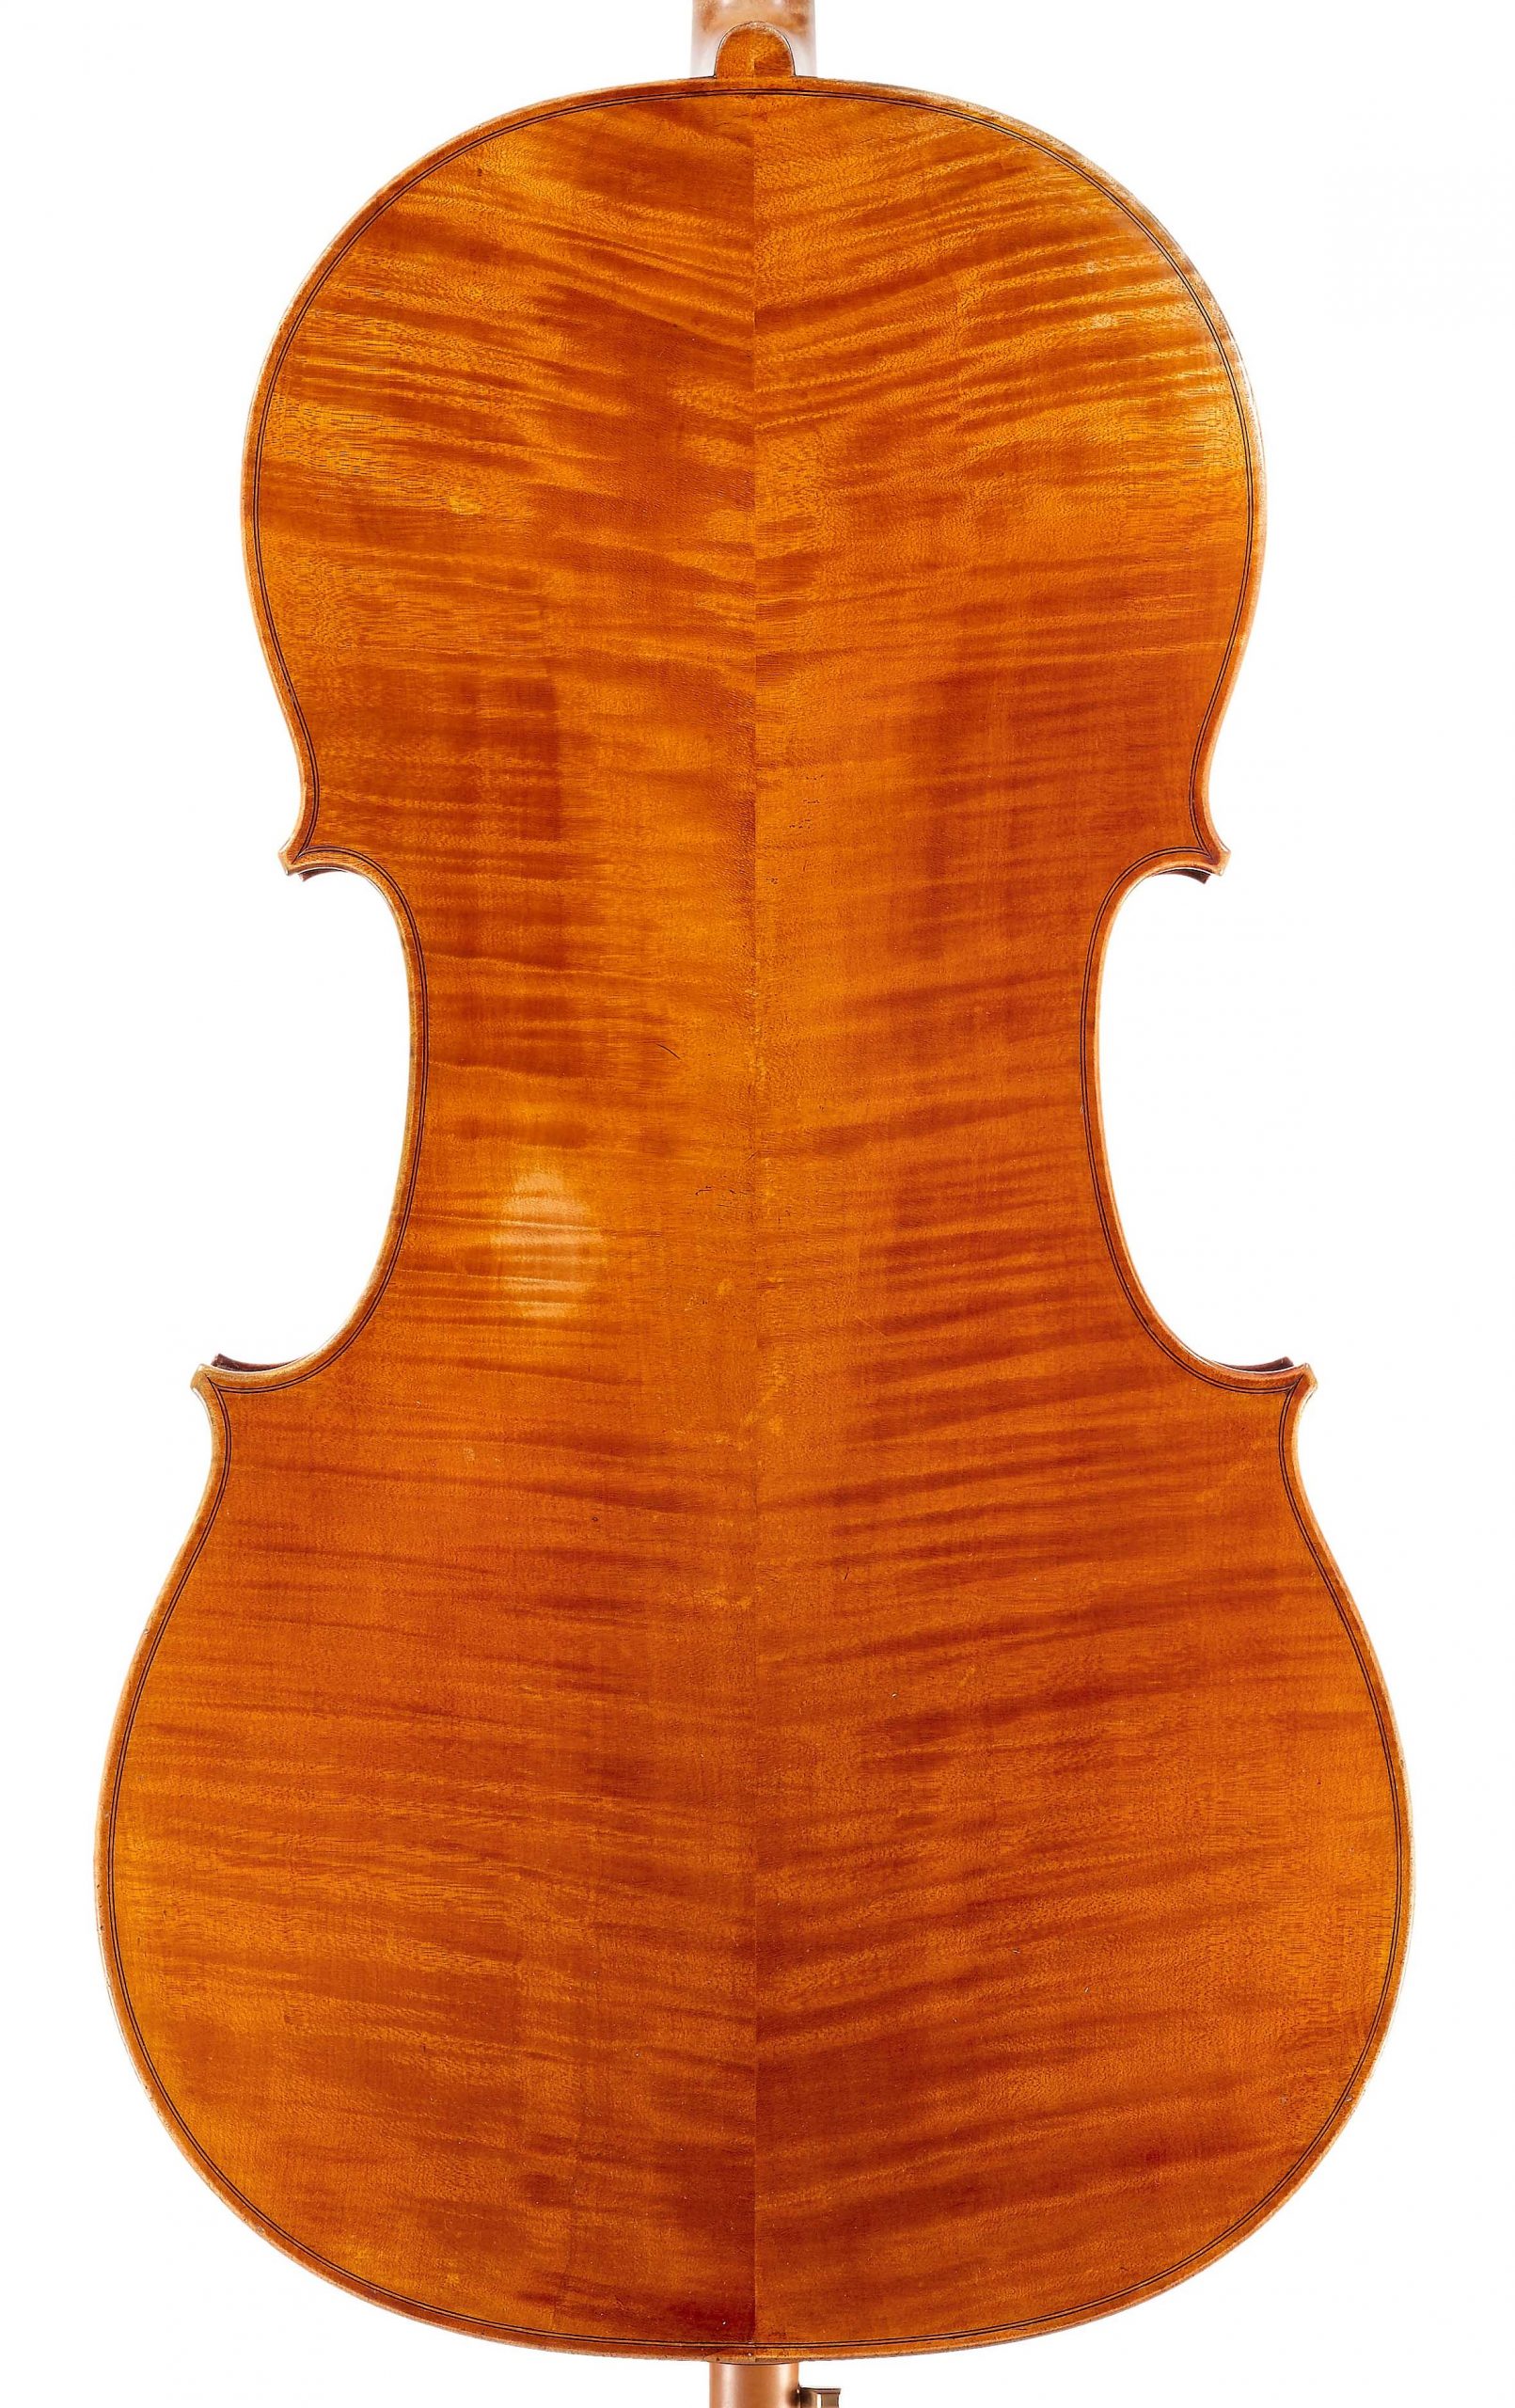 Back of St. Luc cello from the Evangelists quartet by JB Vuillaume, dated 1863